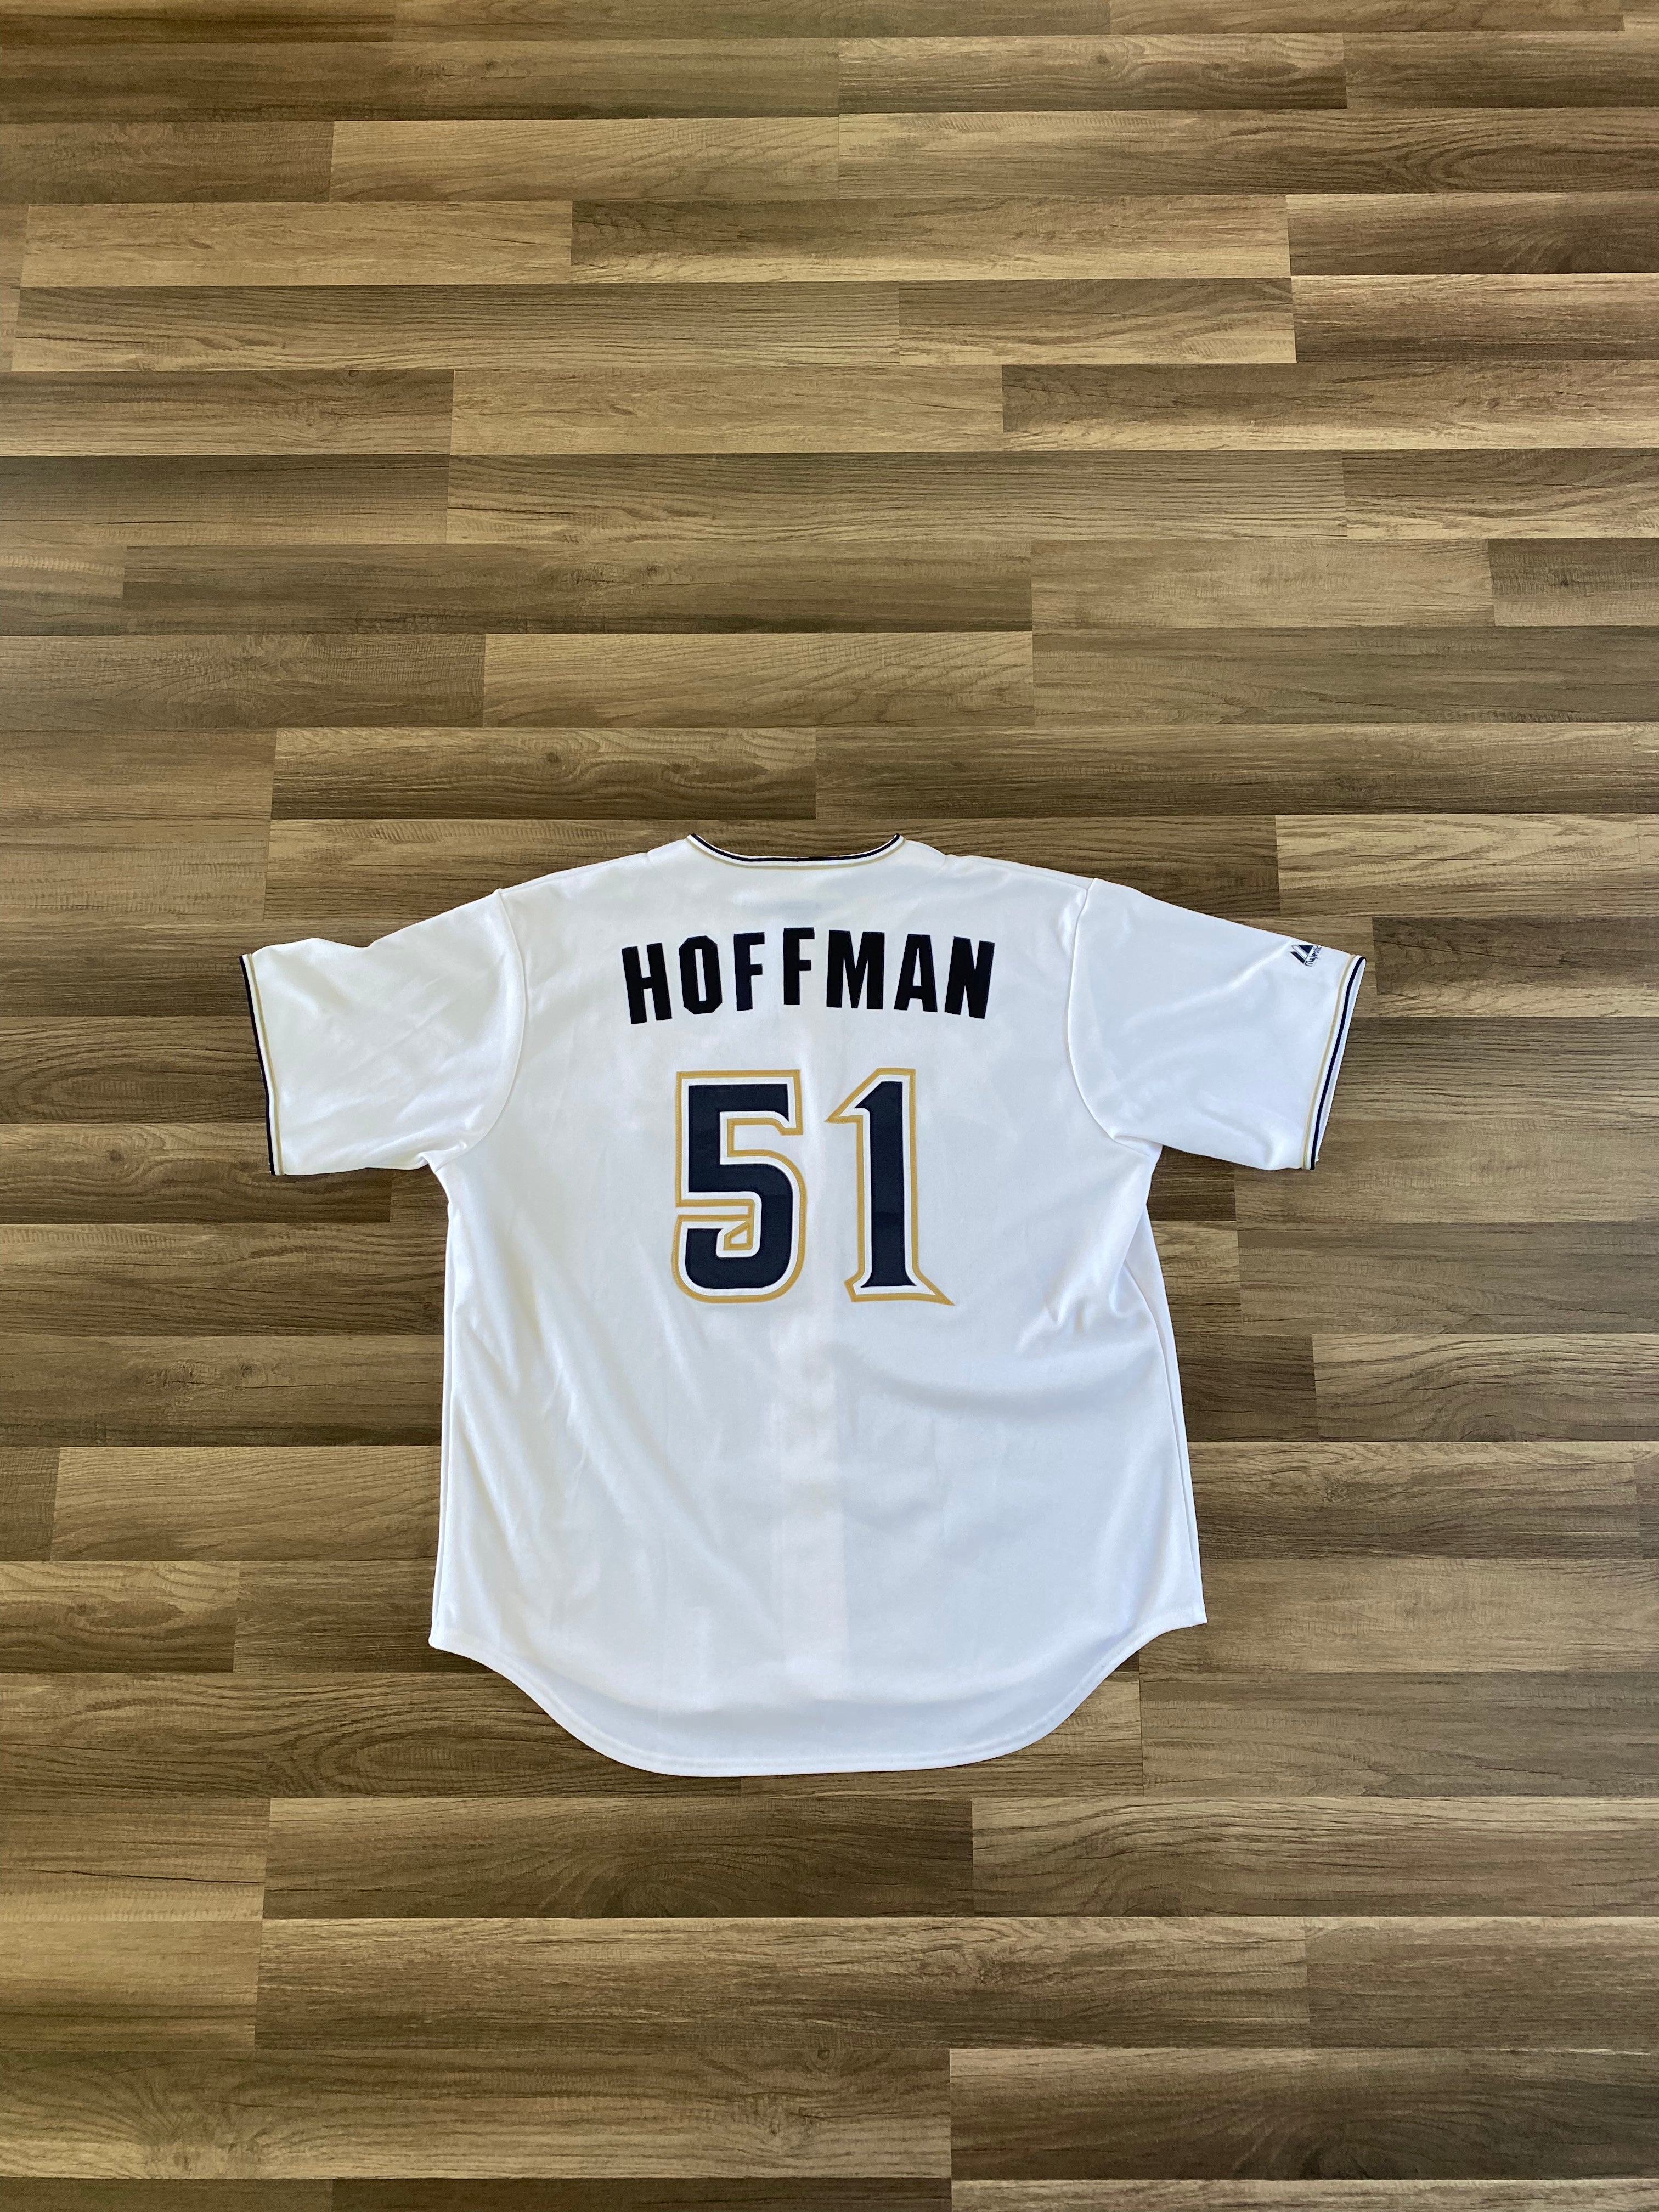 Youth Large Trevor Hoffman Padres Jersey for Sale in La Mesa, CA - OfferUp